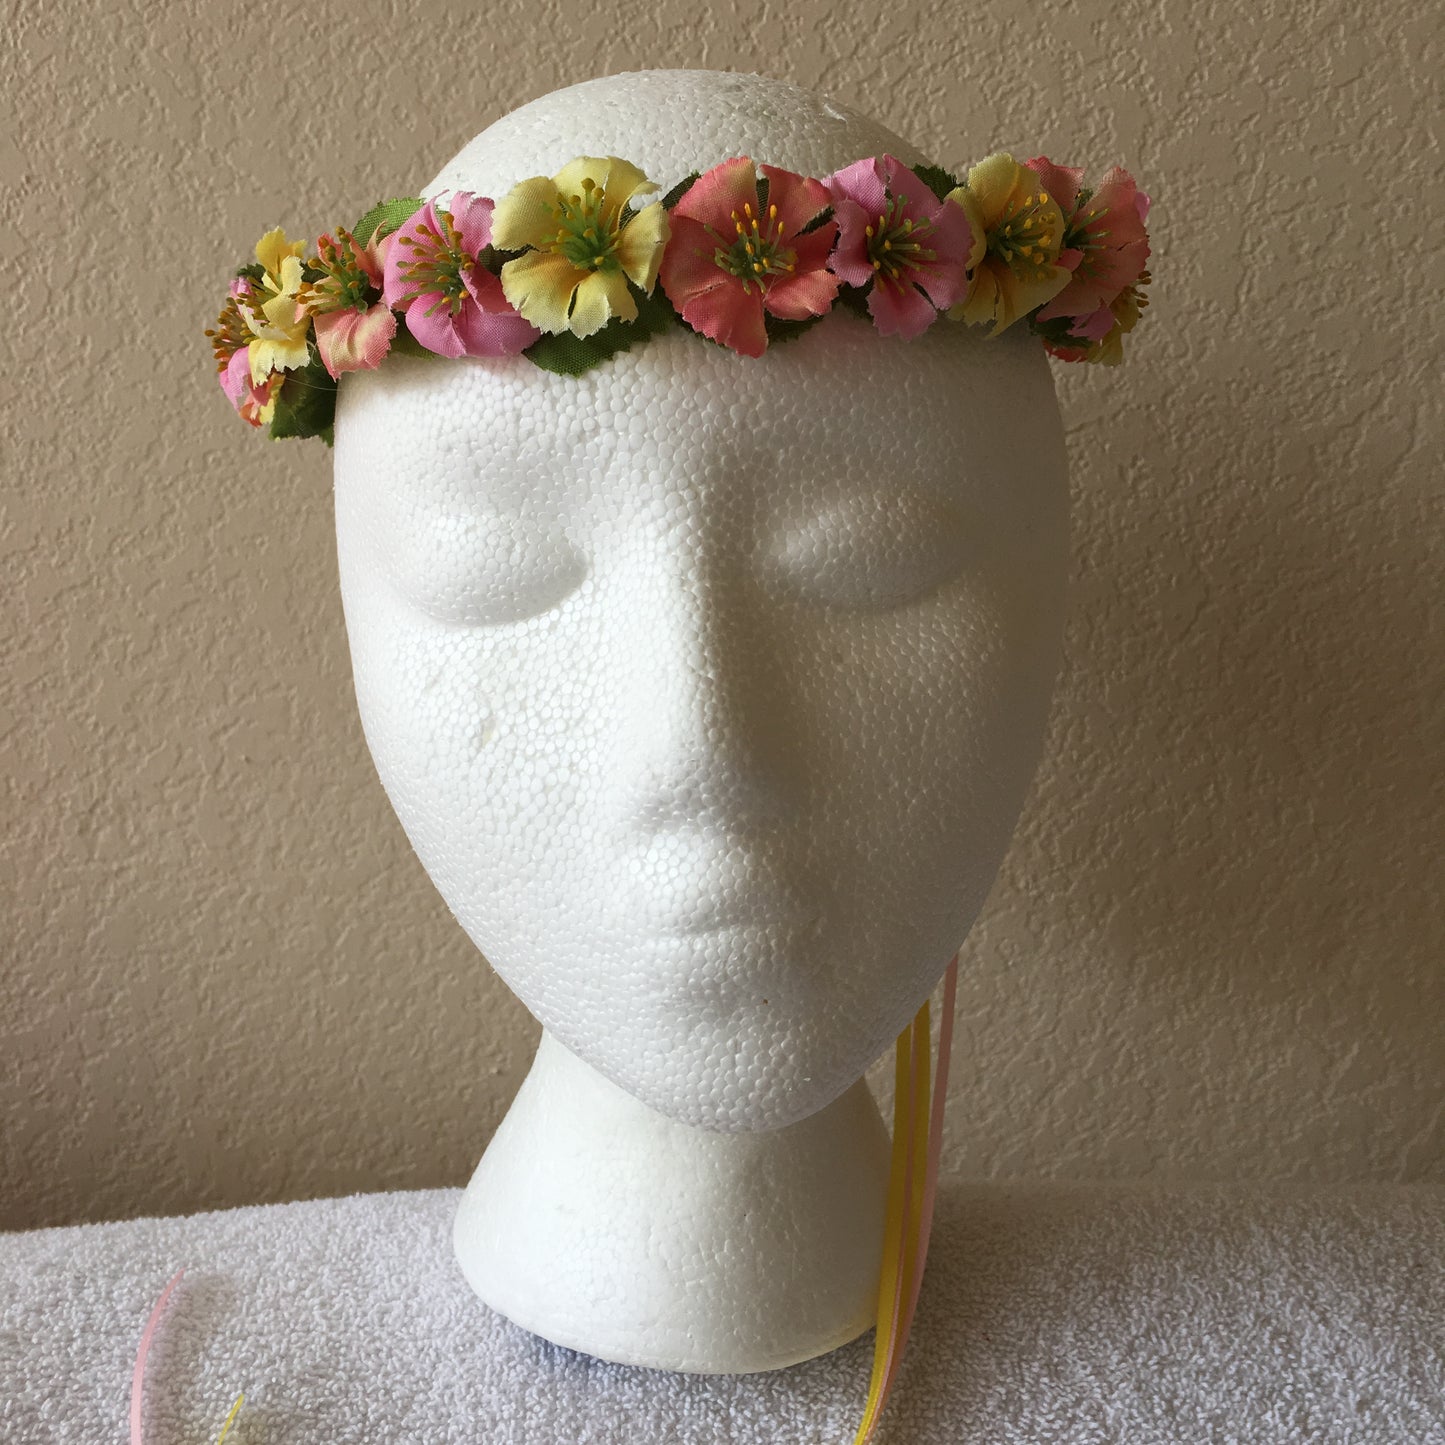 Extra Small Wreath - Pink, yellow, & sunset flowers  +